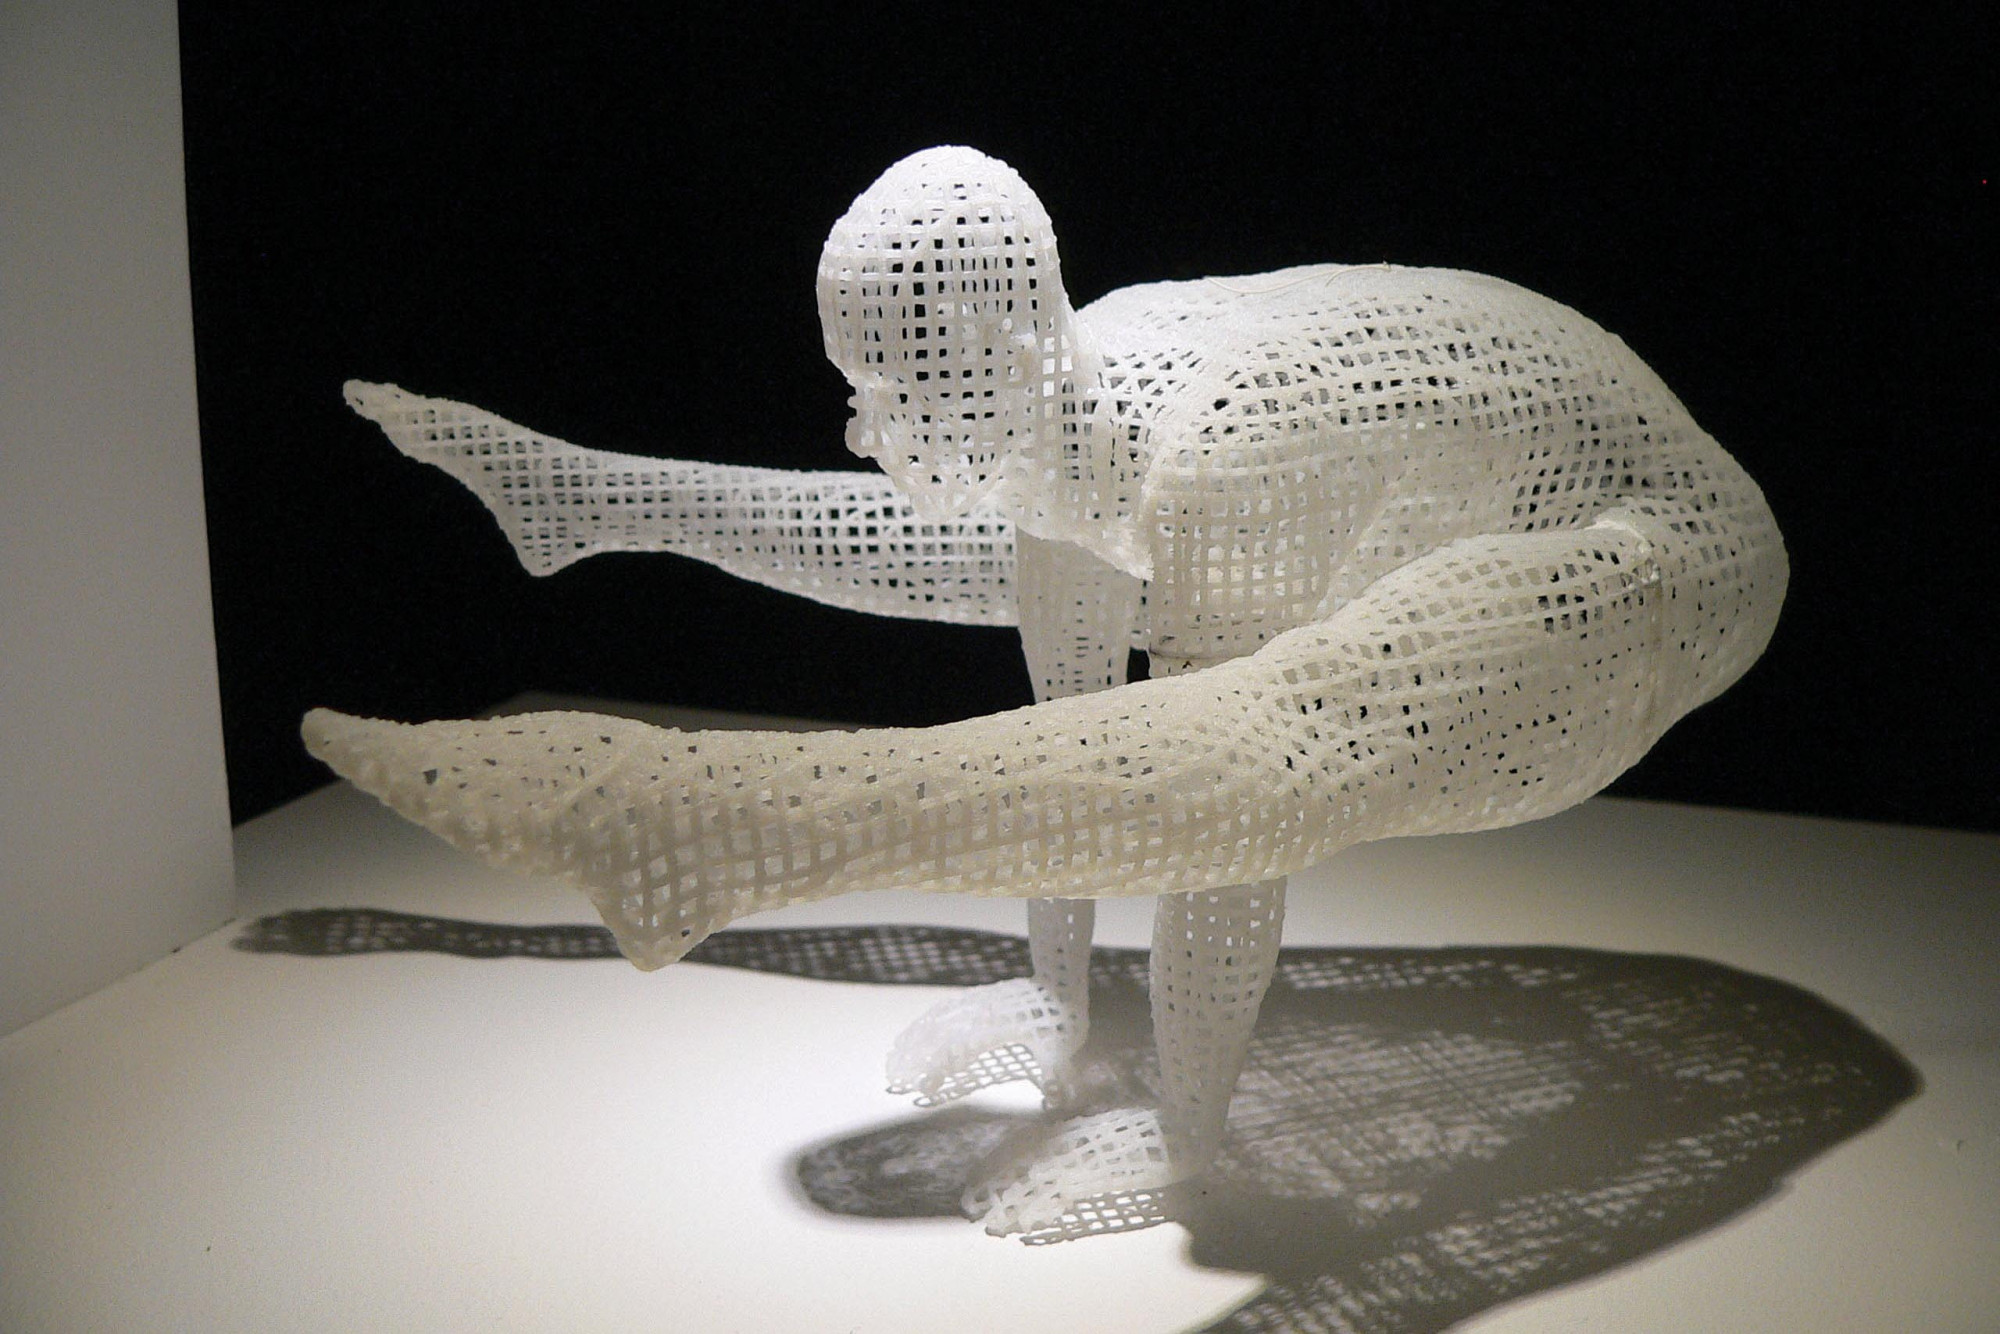 Digital sculpture of a human form in a yoga position